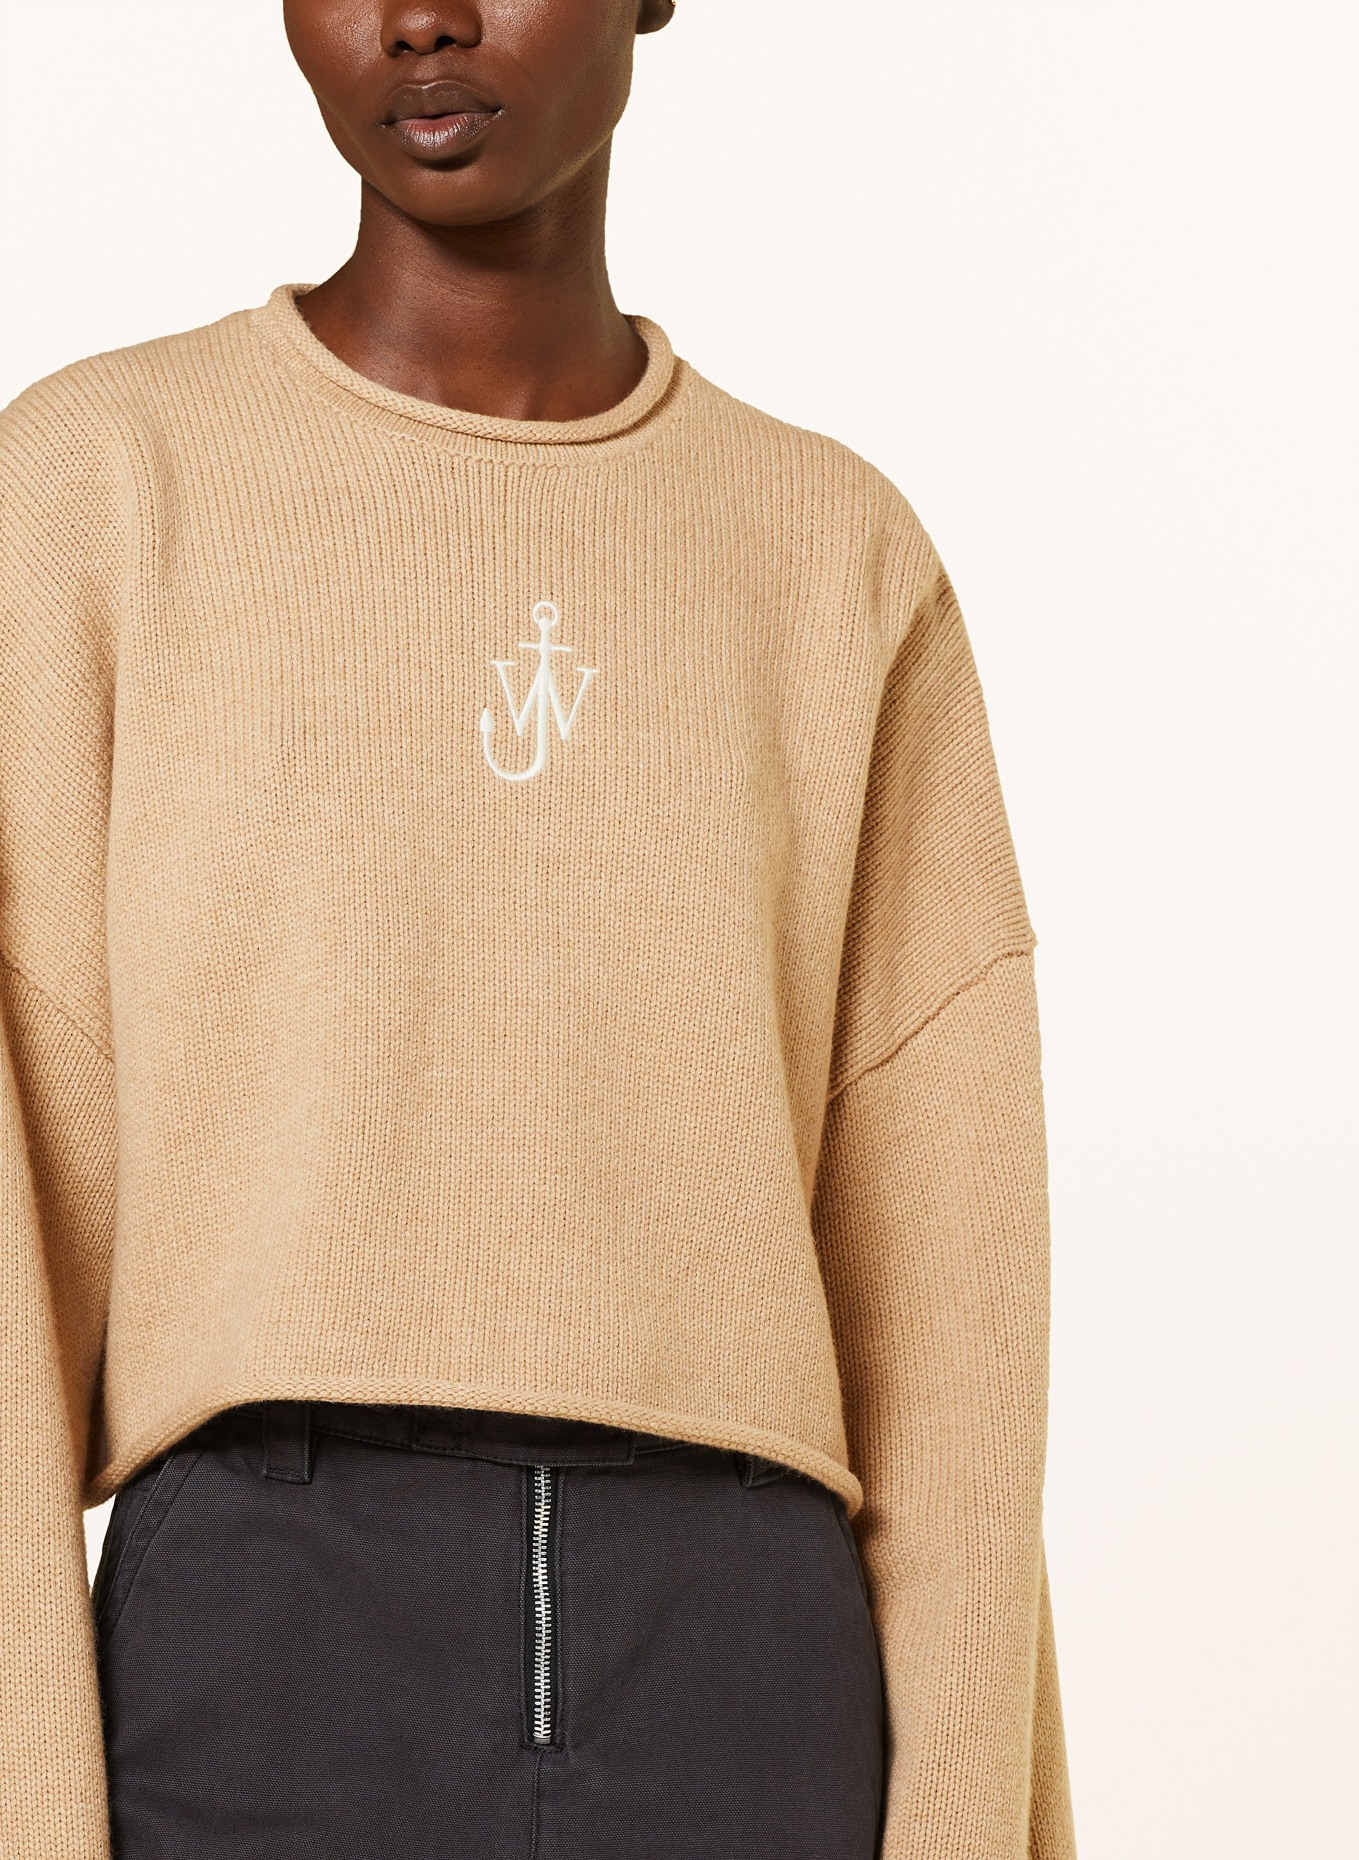 JW ANDERSON Cropped sweater, Color: BEIGE (Image 4)